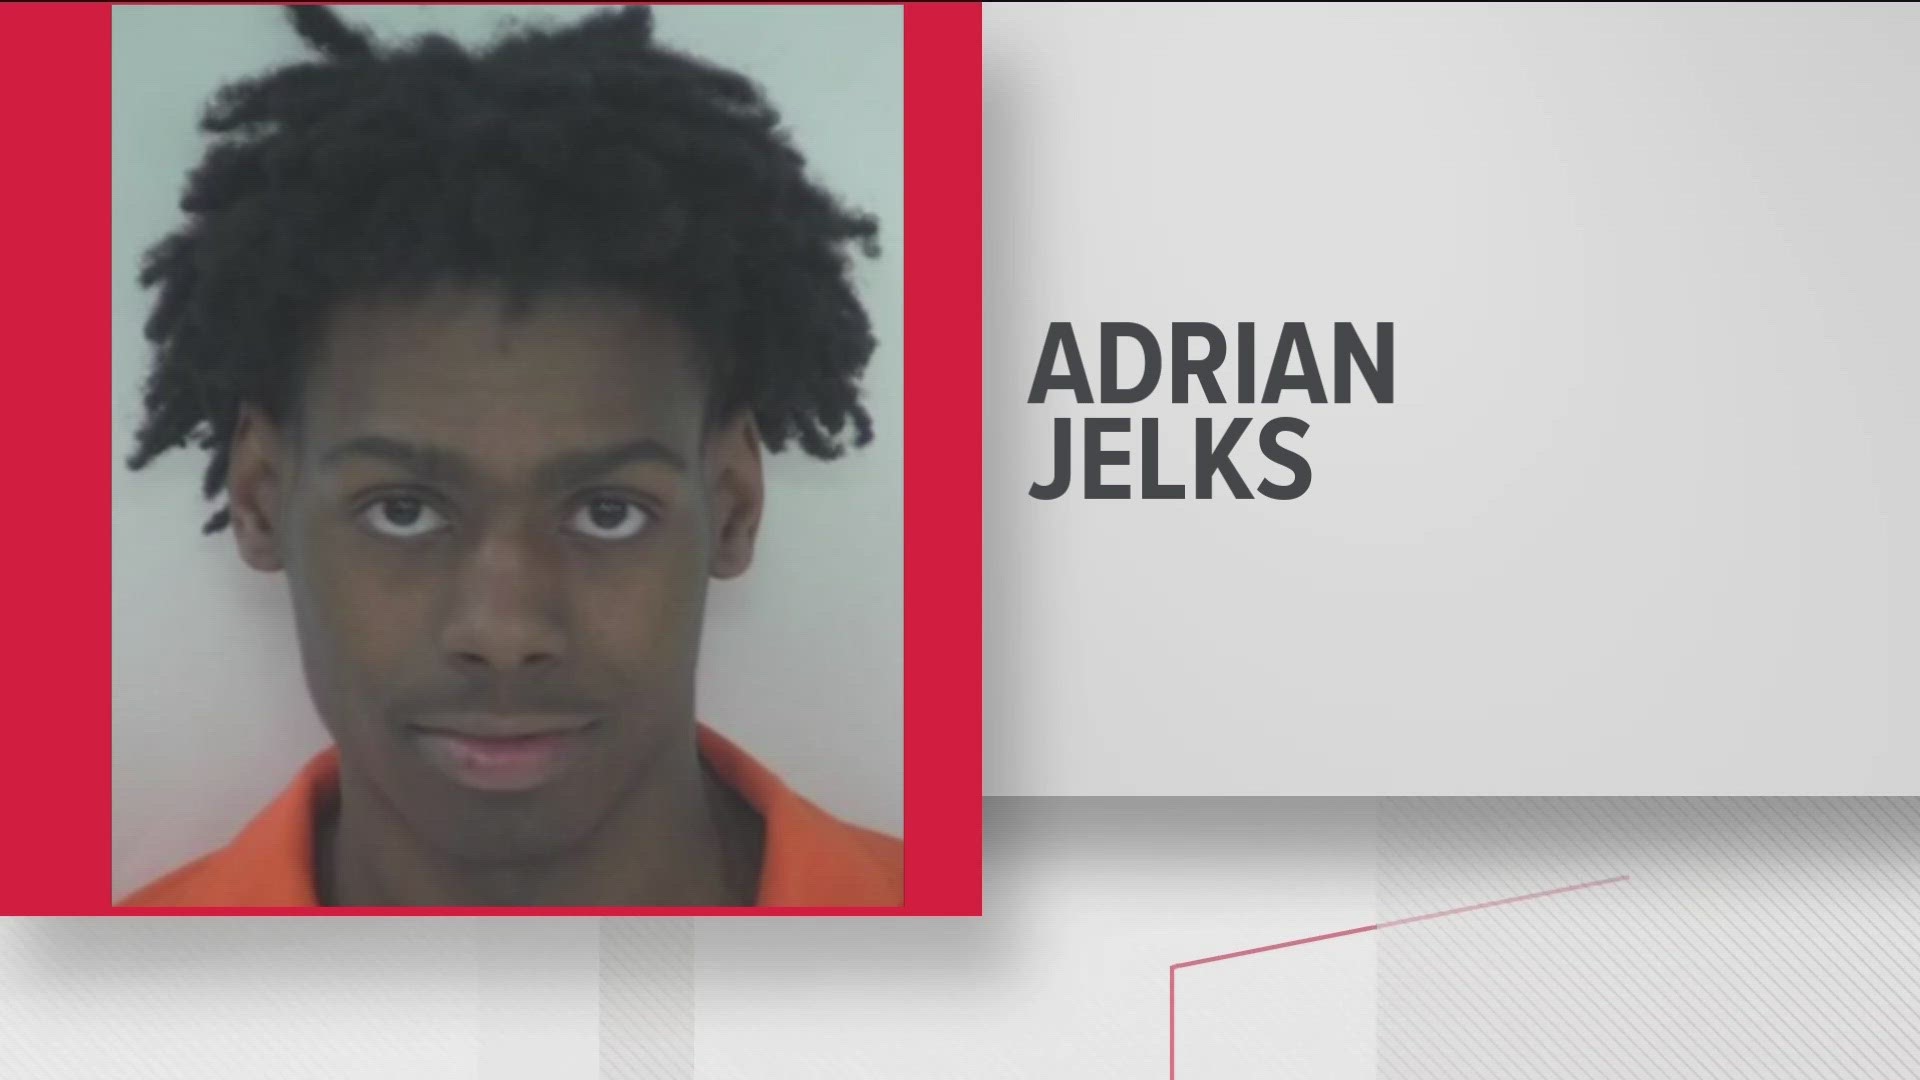 Adrian Jelks, 19, was arrested on Wednesday morning around 2:19 a.m.